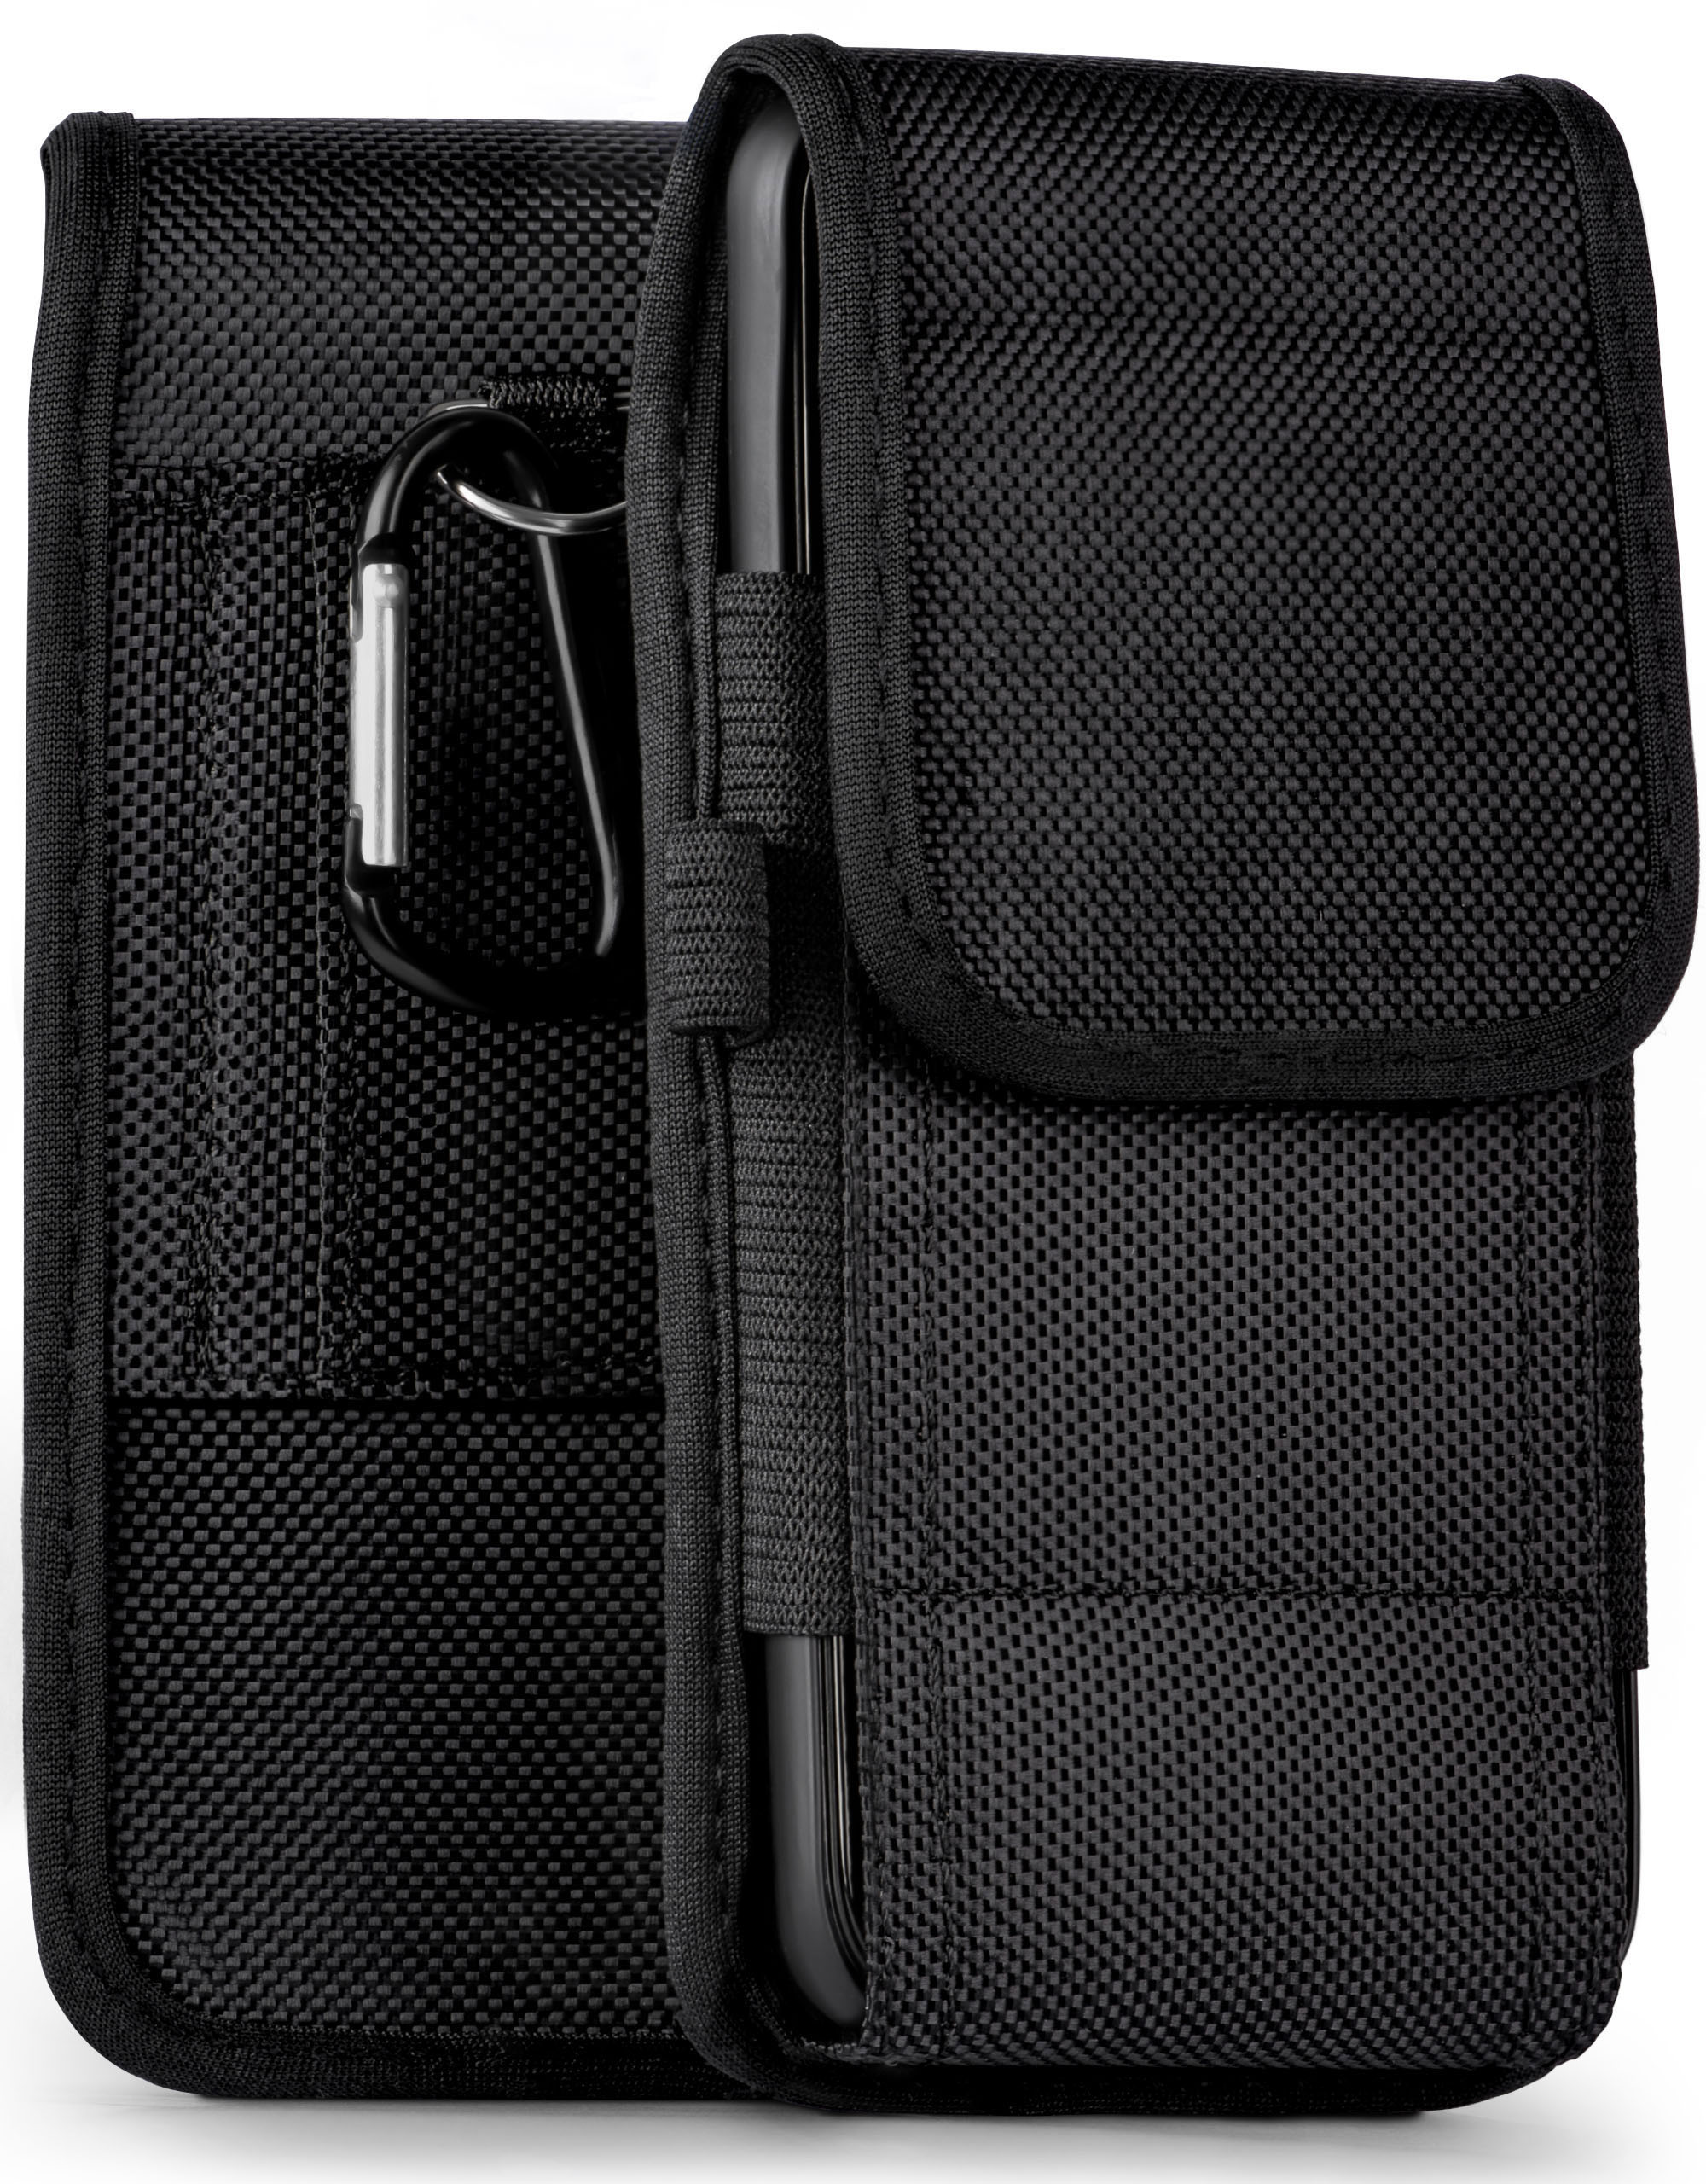 Agility Holster, C10, Aquos Trail MOEX Case, Sharp,